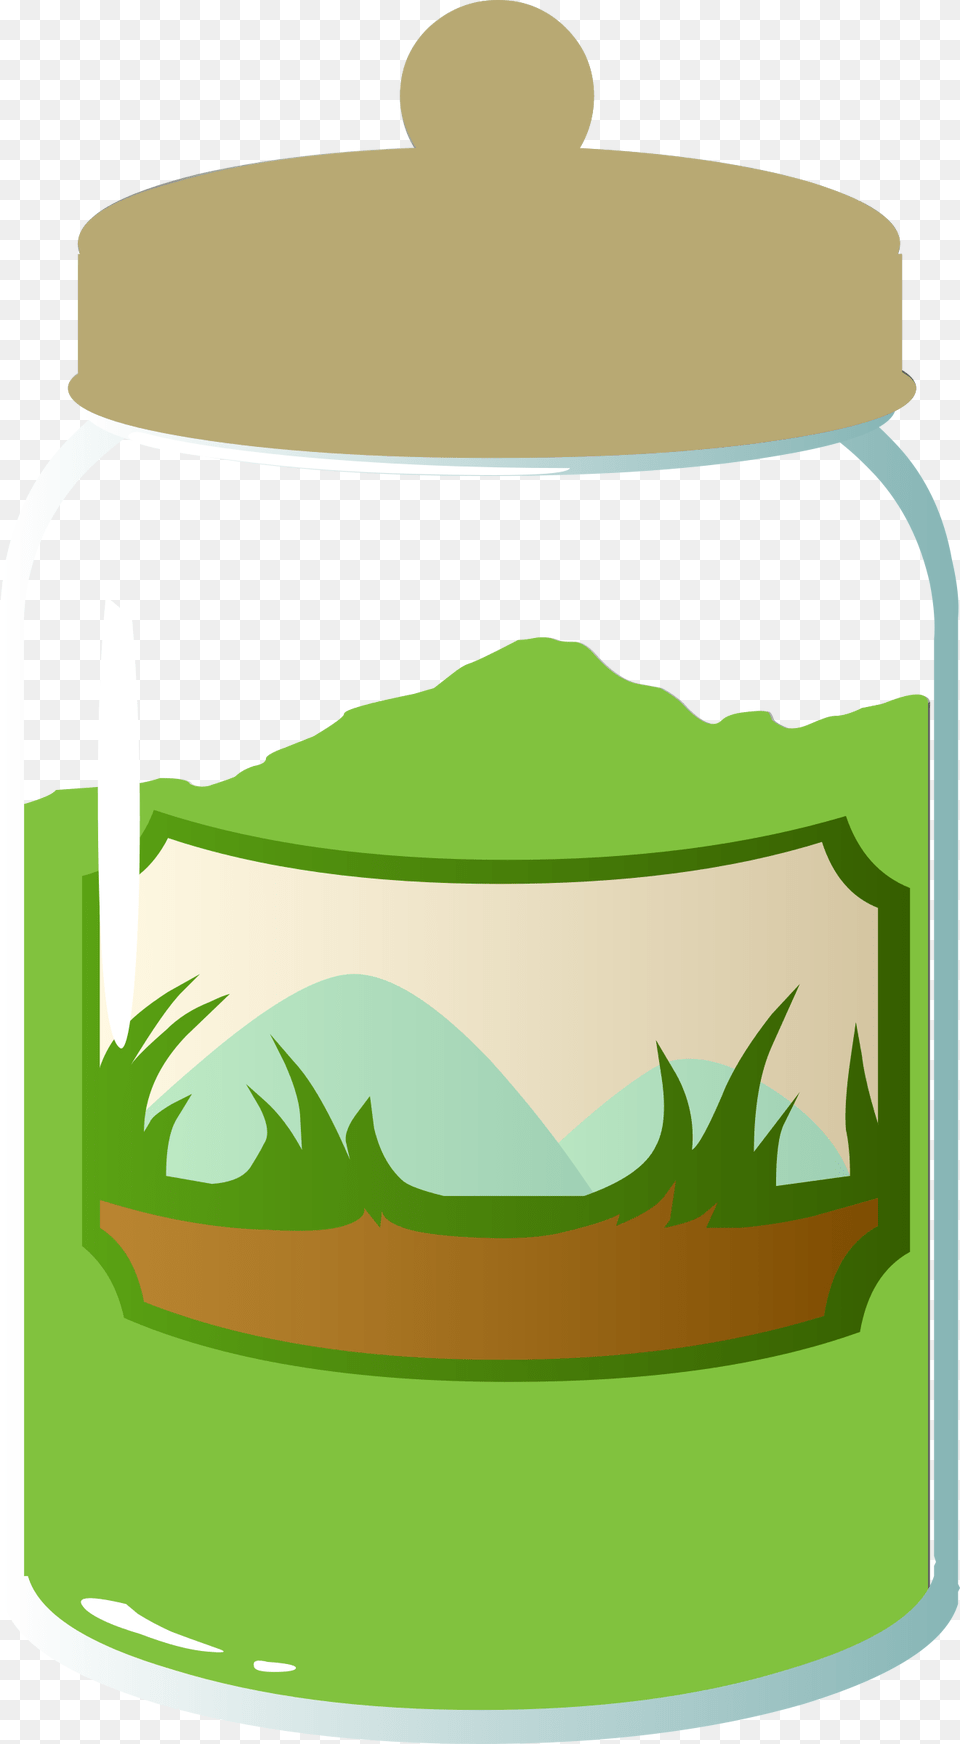 This Icons Design Of Alchemy Fertilidust Lite, Jar, Pottery Png